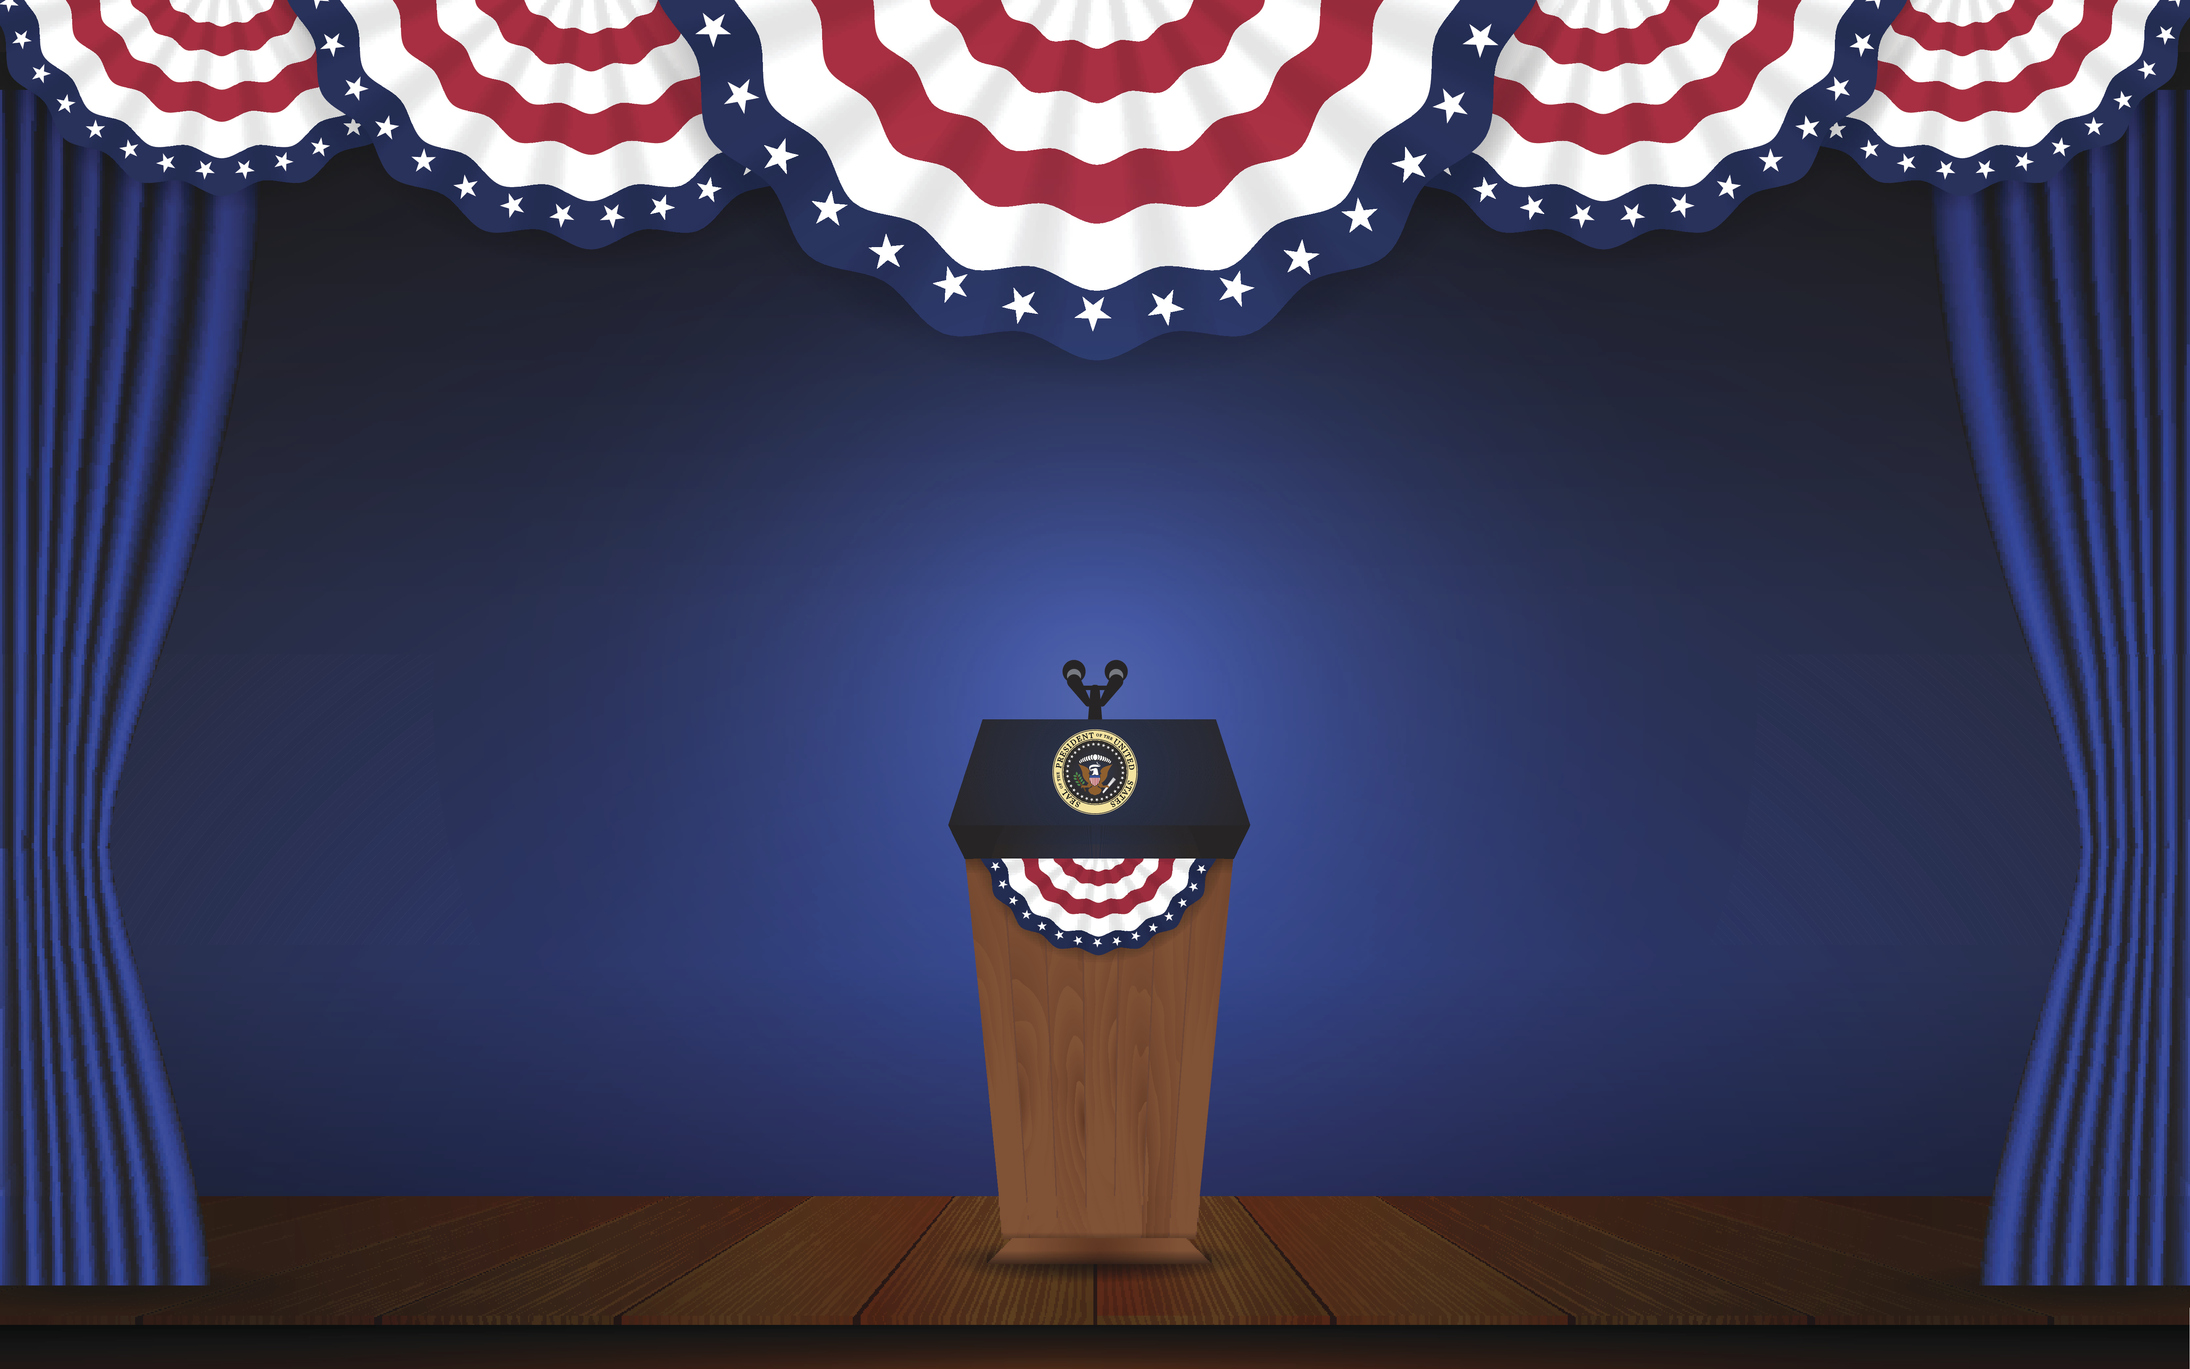 USA President podium on stage with semi-circle decorative flag on top. Open curtain stage with blue background scene. Vector illustration